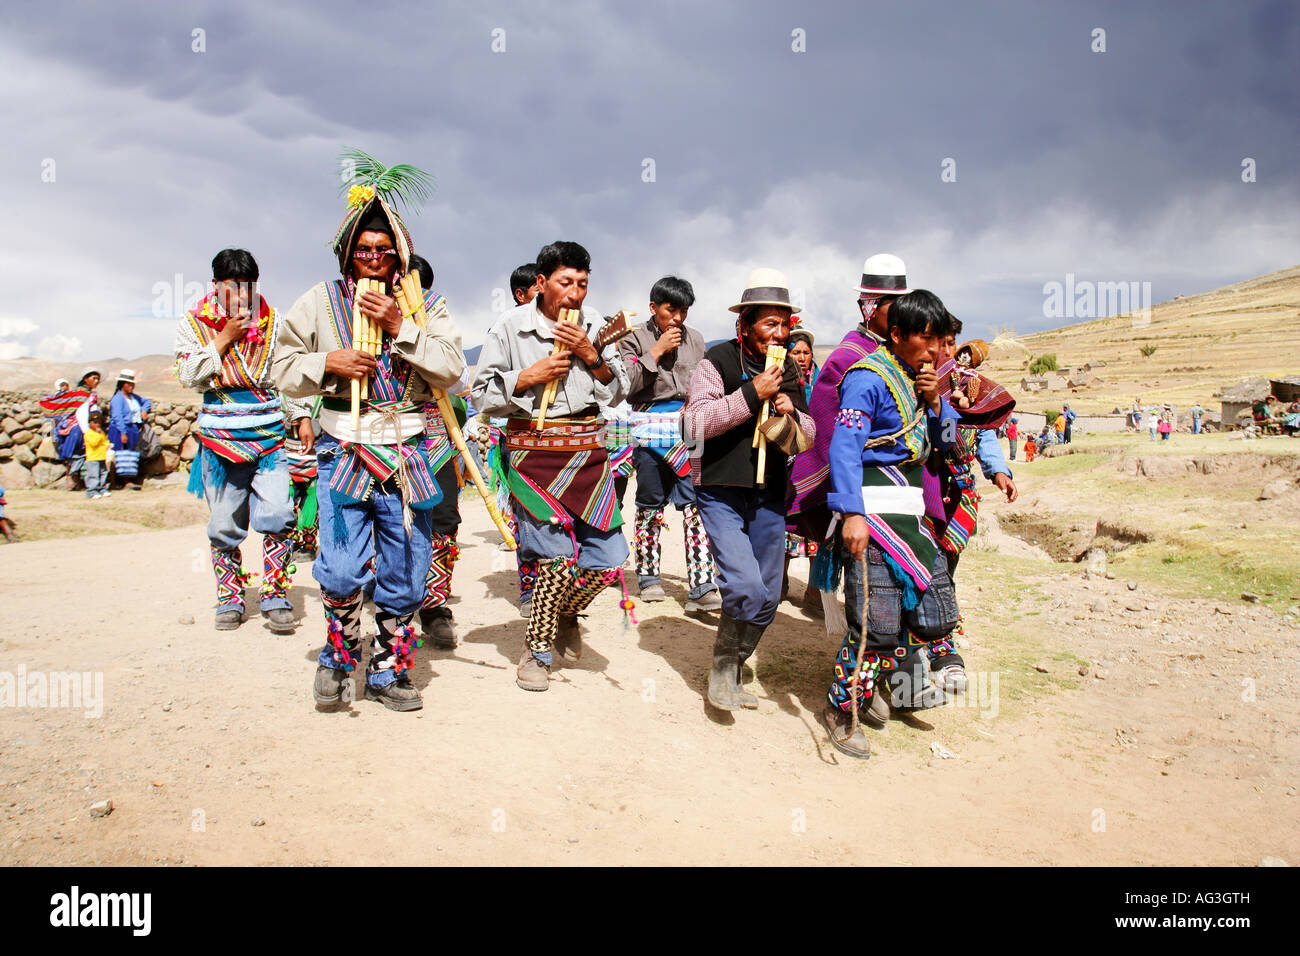 Anarchy in the Andes Potosi Inka s gather in Macha for the annual Tinku festival to worship pachamama the mother earth Stock Photo